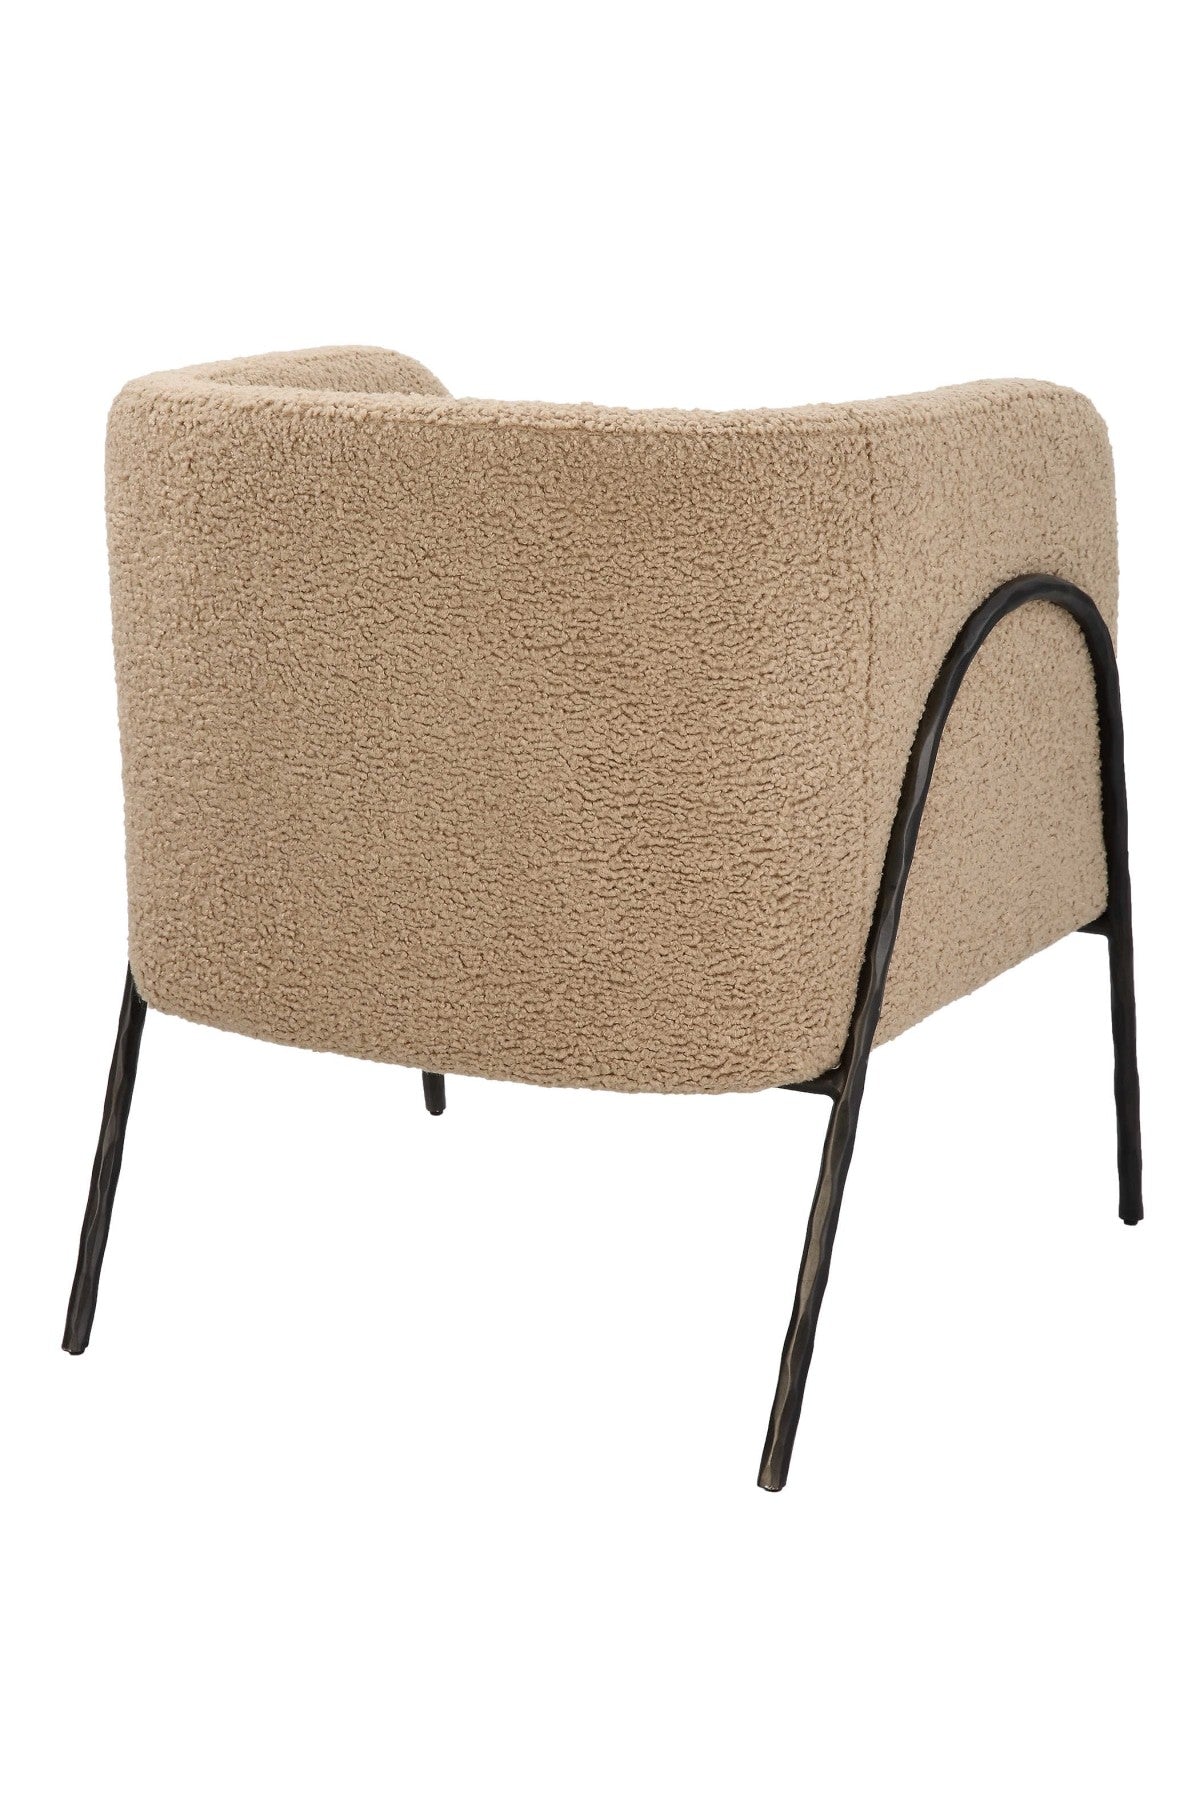 Jacobey Accent Chair